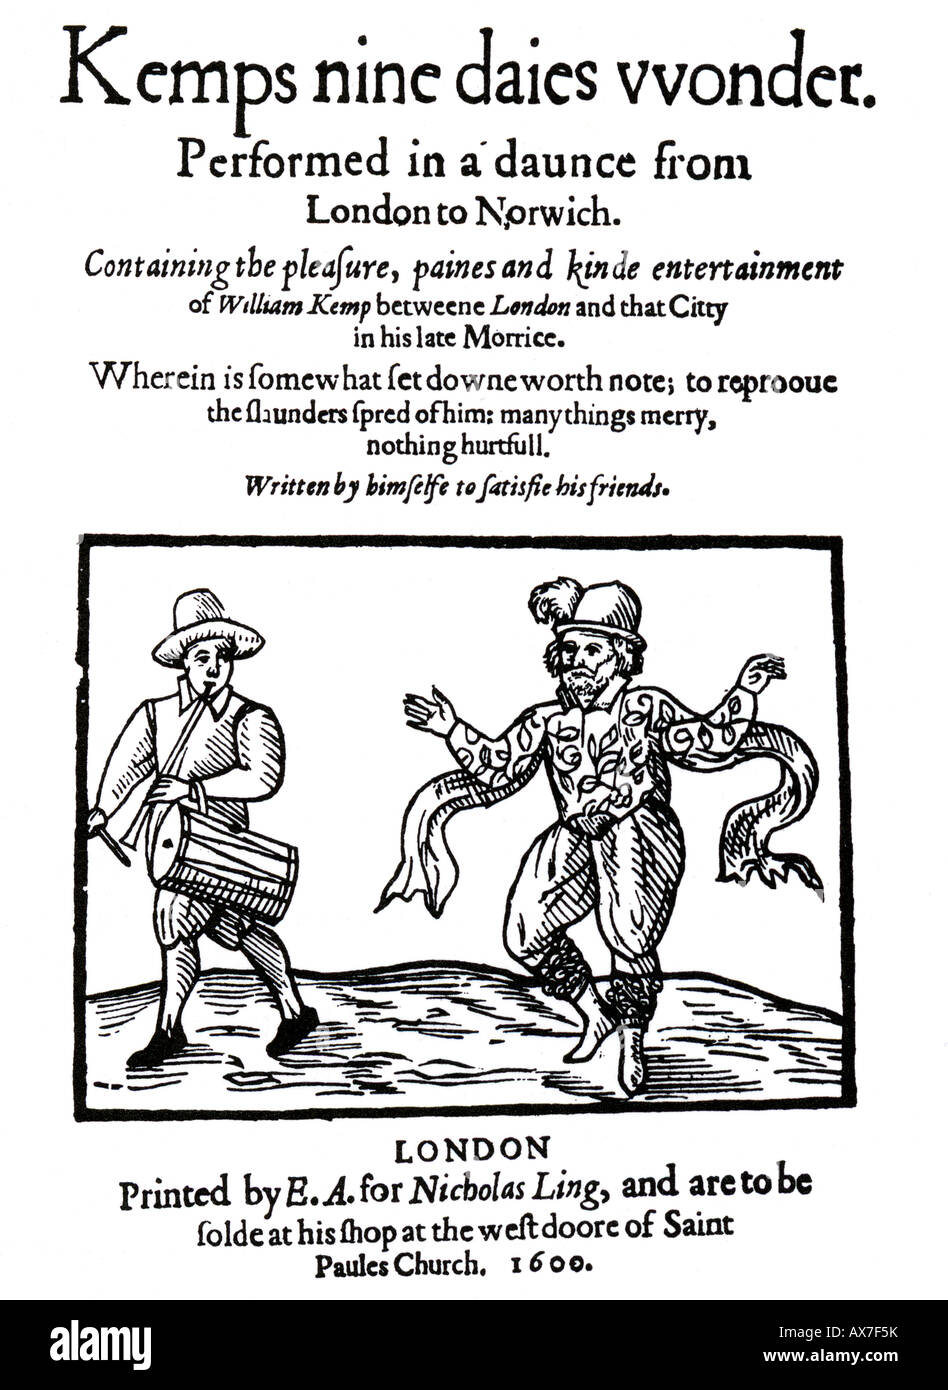 KEMPS NINE DAIES WONDER published in 1600 recording how William Kemp Morris danced  from Norwich to London - see Description Stock Photo